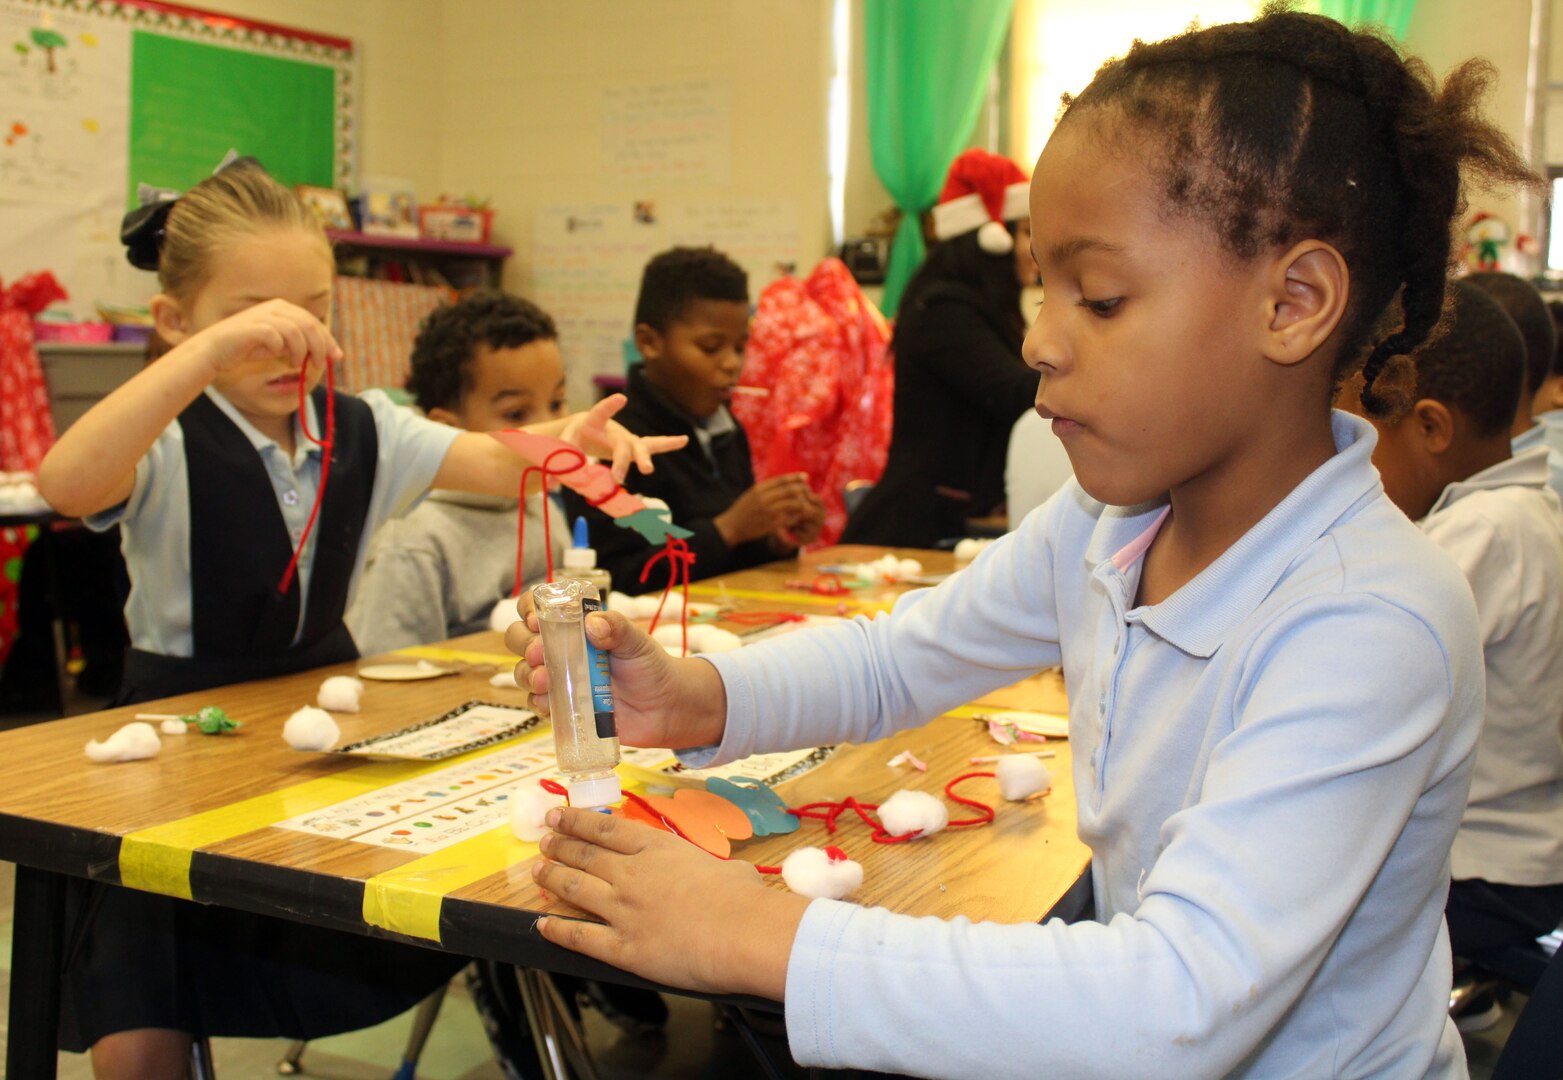 Benjamin Franklin Elementary School students make ornaments during the DLA Troop Support Children’s Holiday Party Dec. 12, 2019 in Philadelphia.